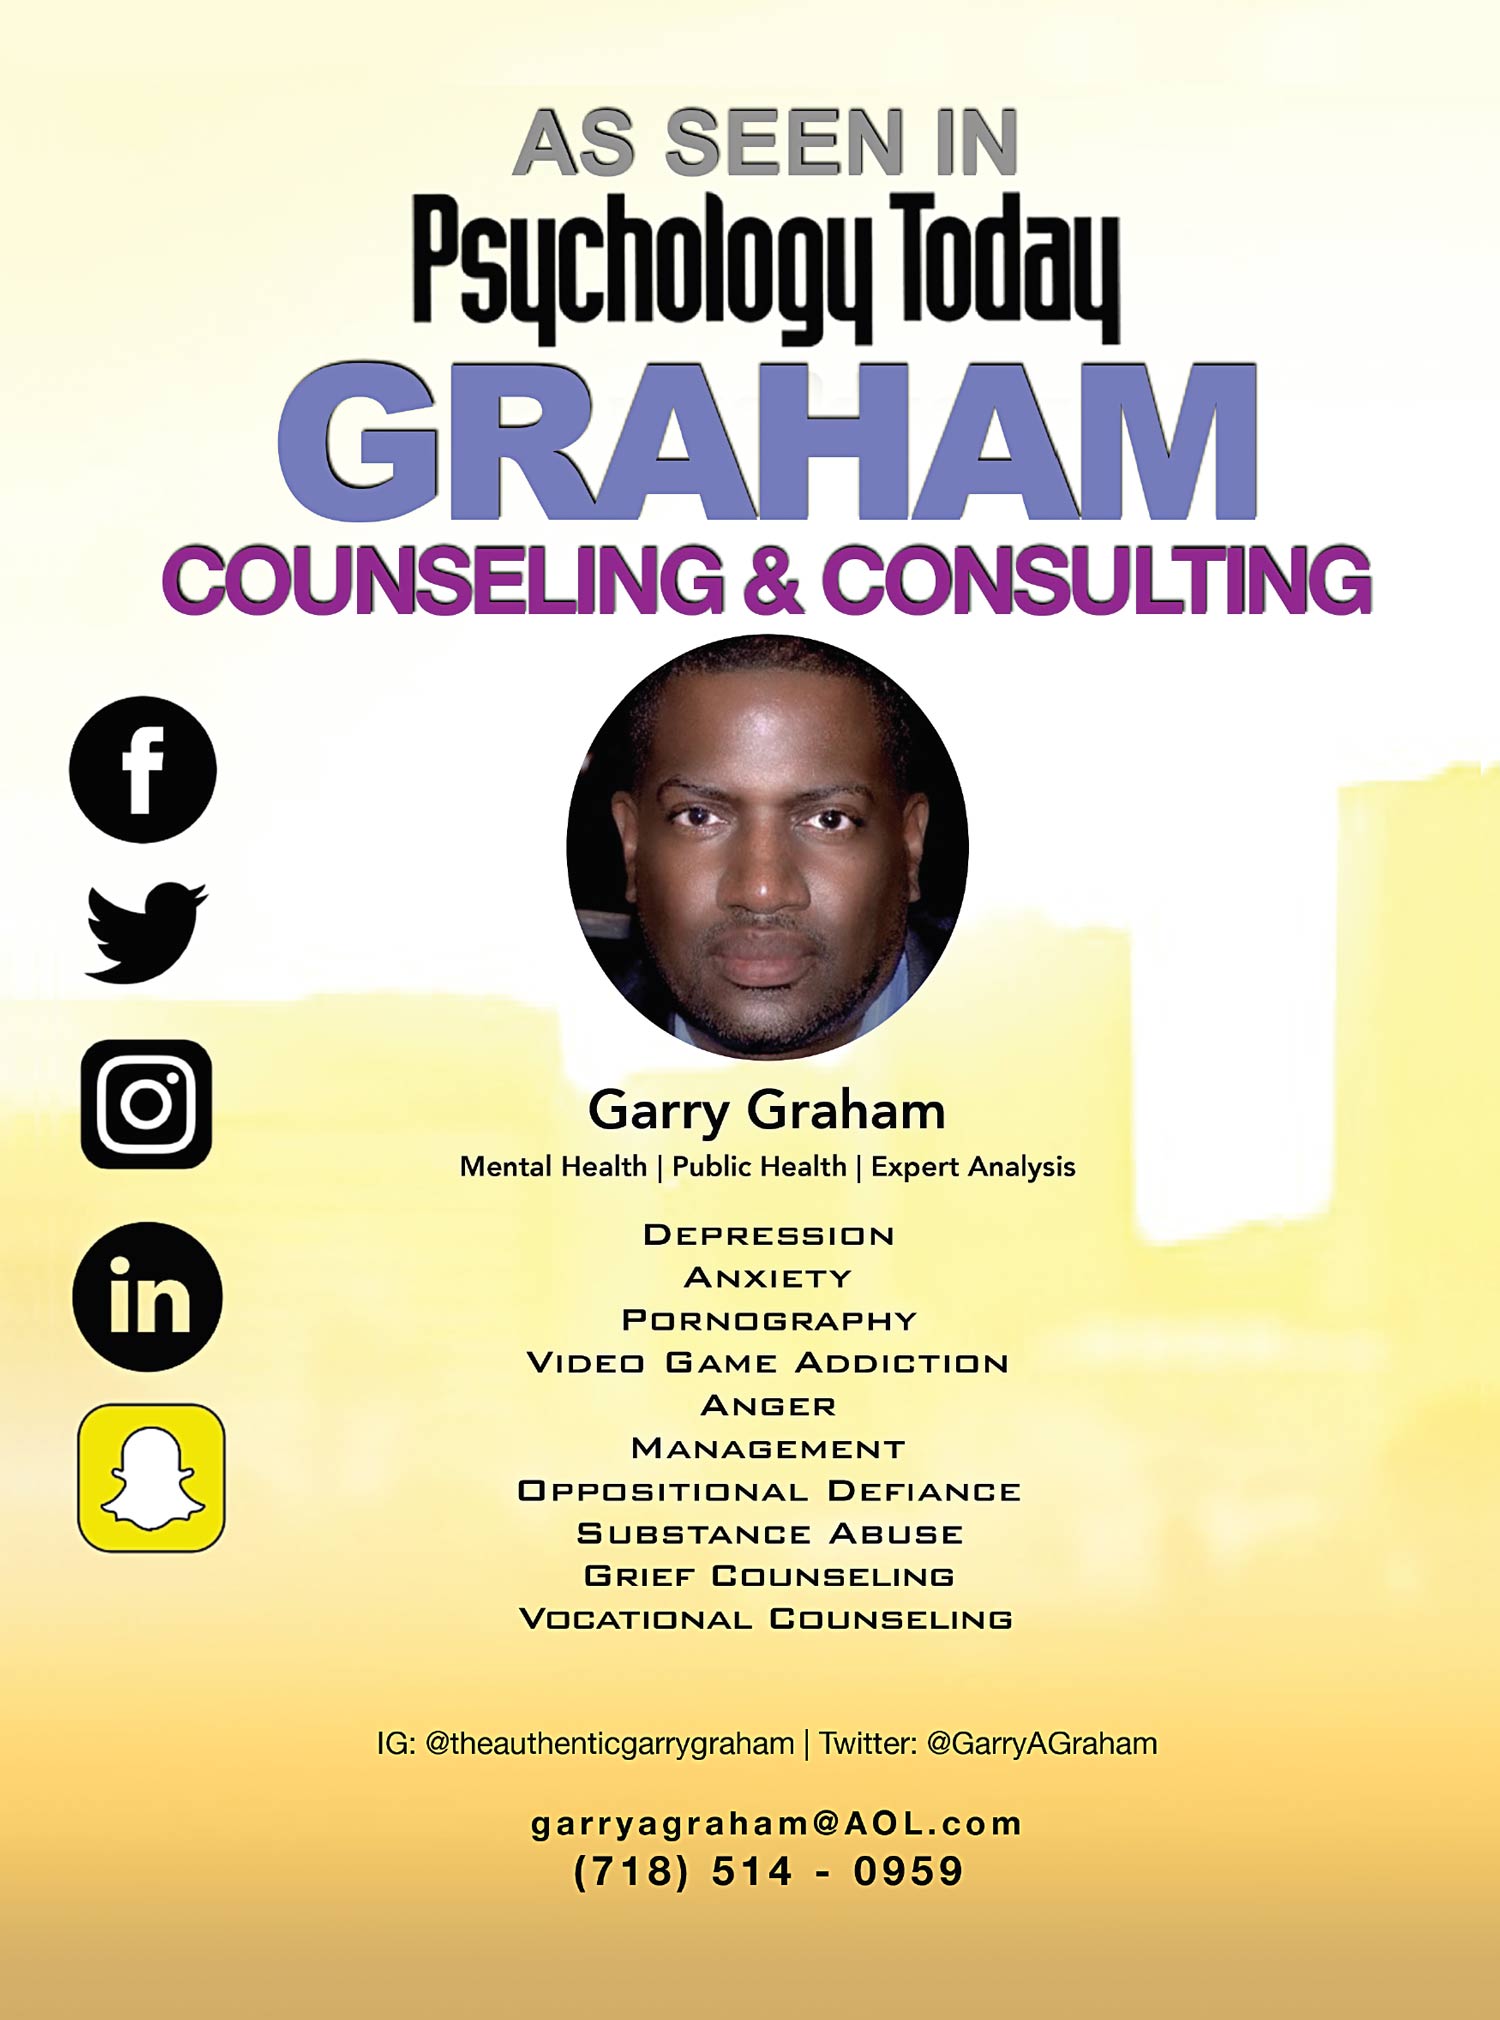 Graham Counseling & Consulting Advertisement